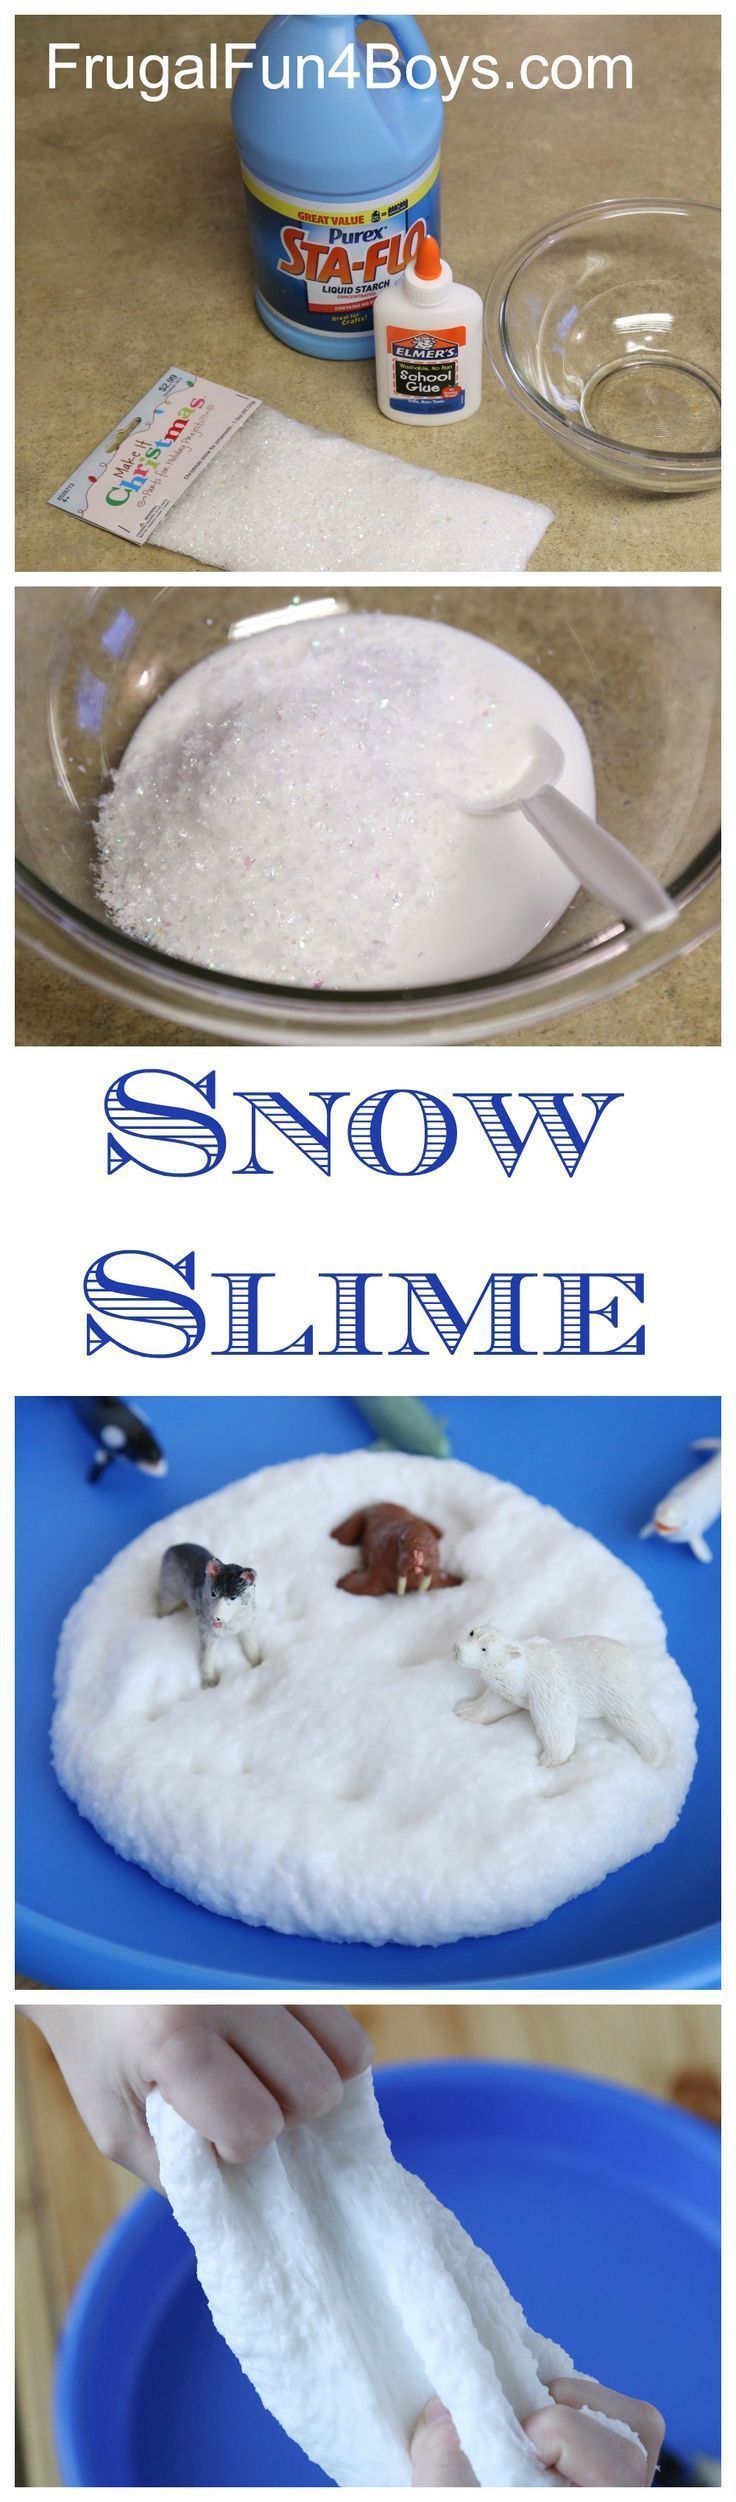 How to Make Snow Slime – This stuff stretches and squishes and sparkles like snow!  Fun winter activity for kids.